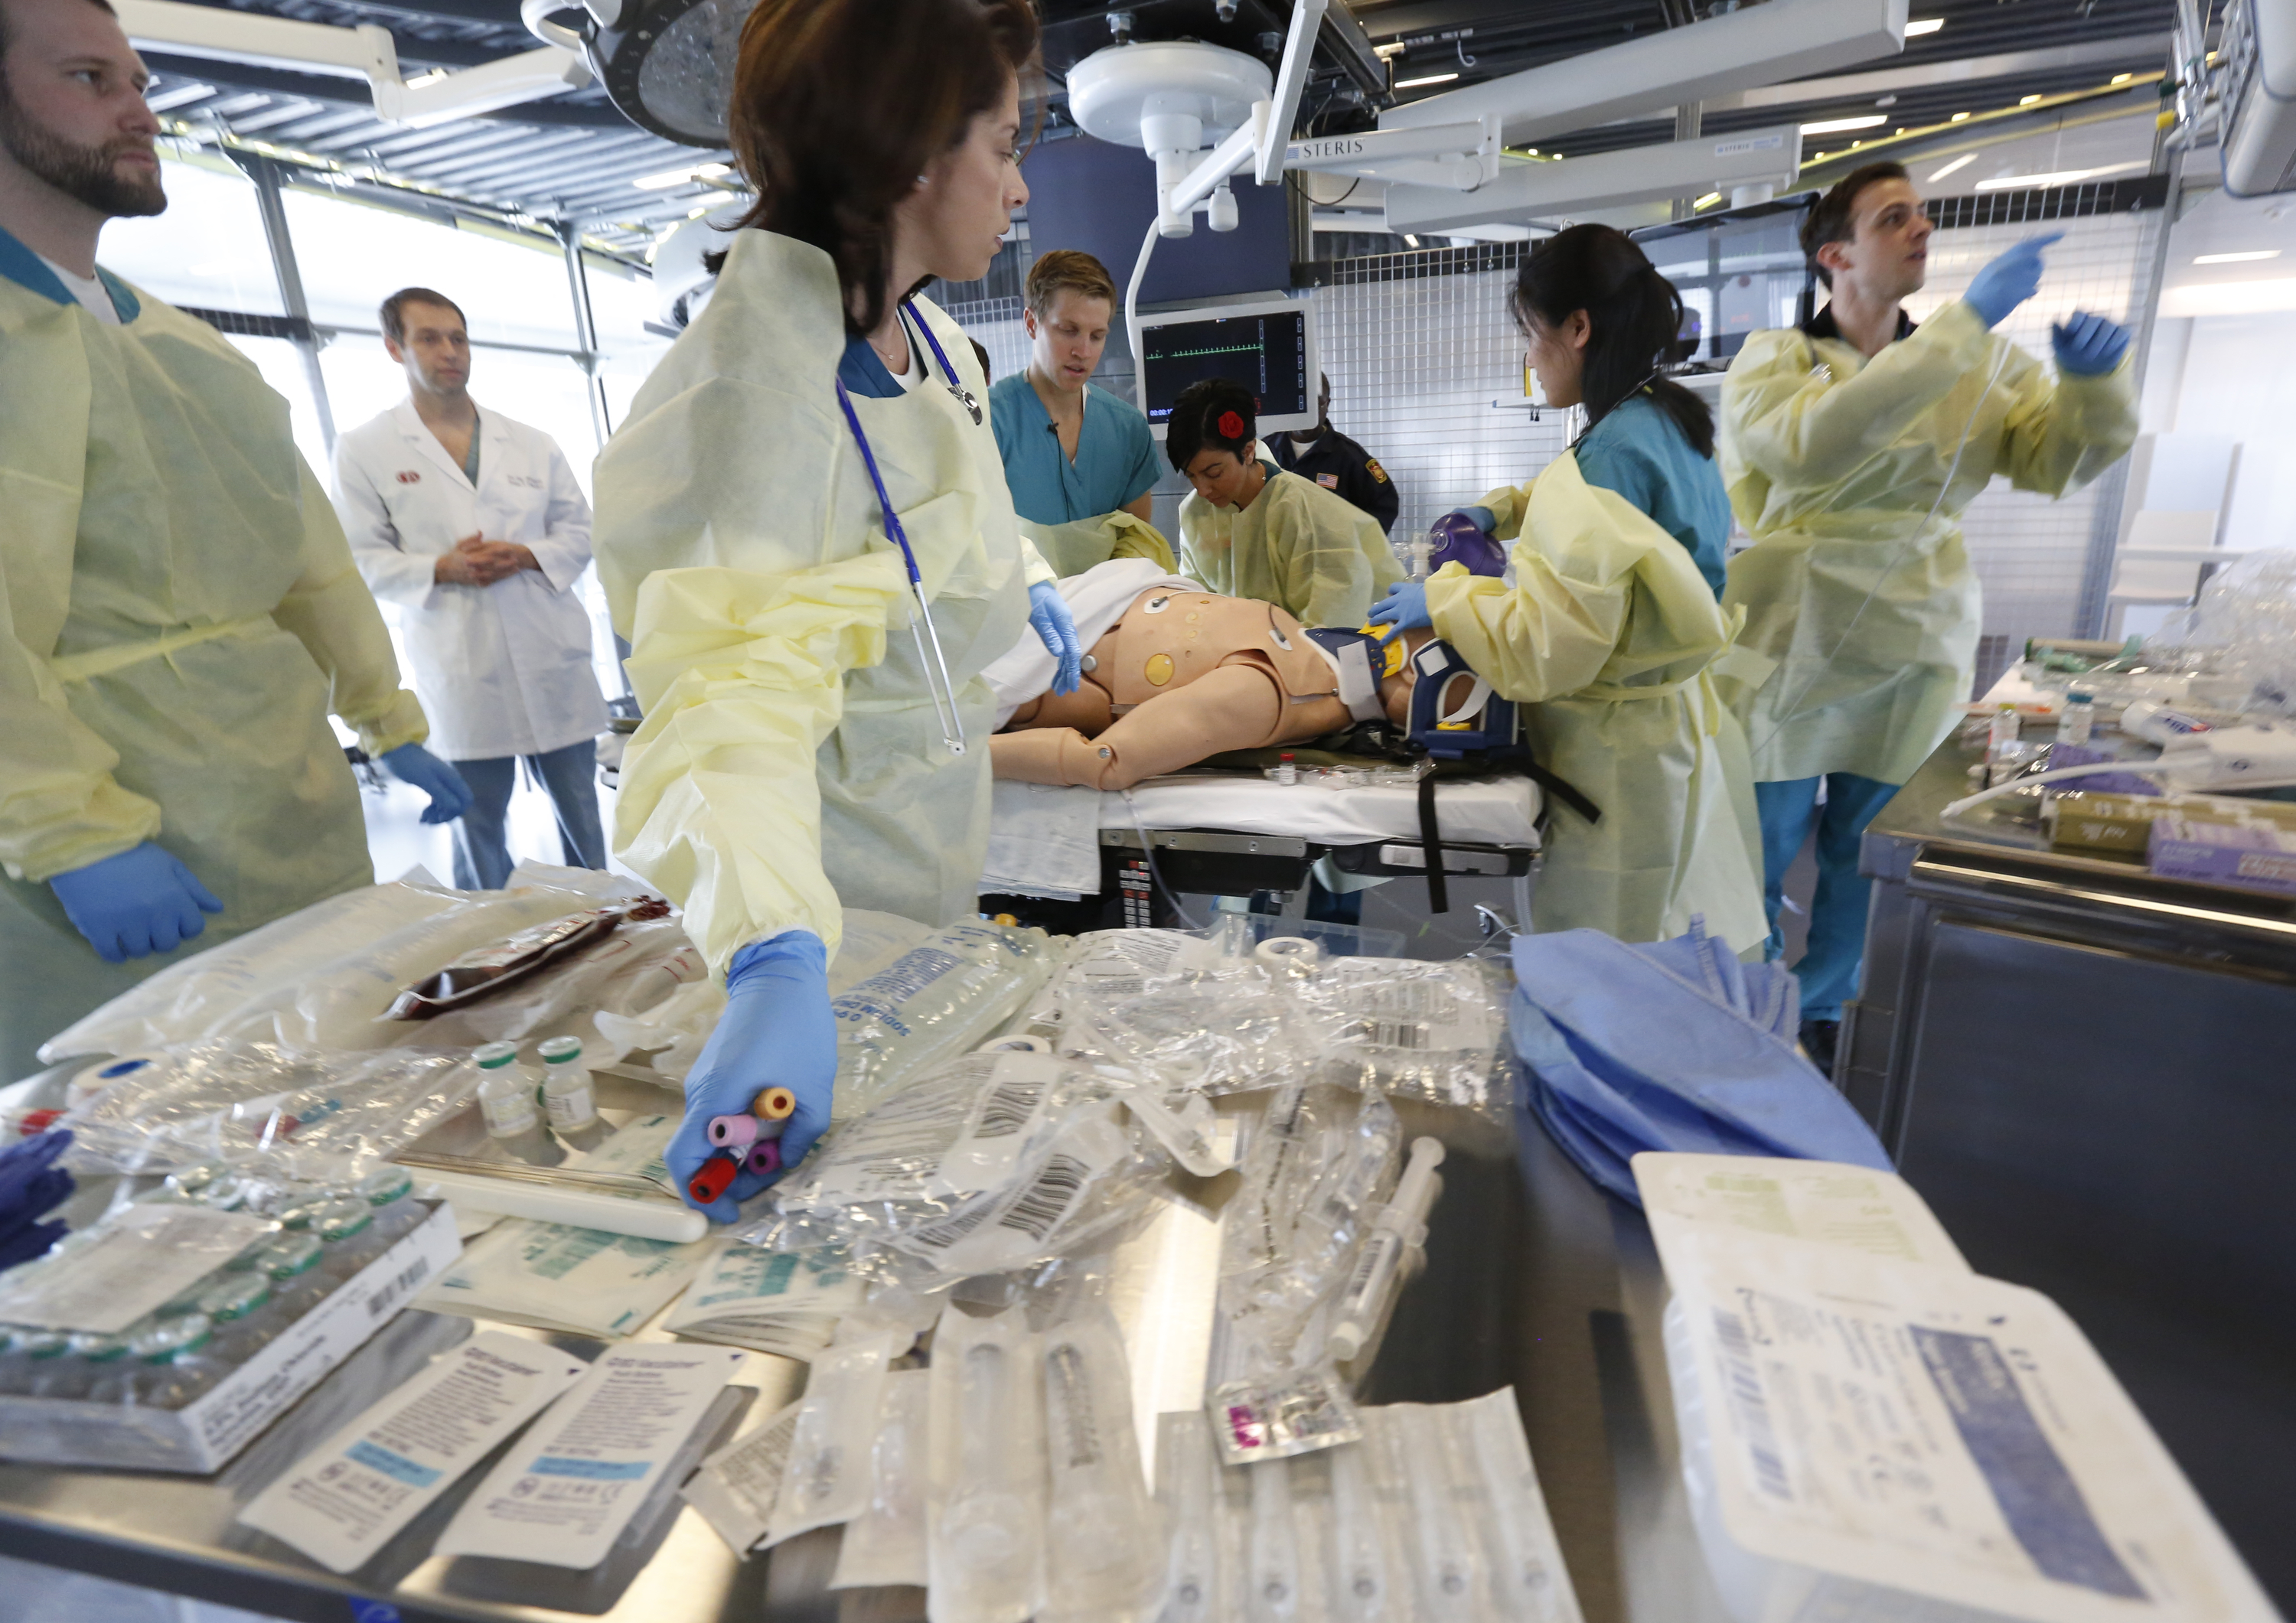 Surgical residents with experienced surgeons train on a mannequin at the Surgical Simulation and Training Laboratory in the Department of Surgery at Cedars-Sinai Medical Center, Research, Technology Innovation